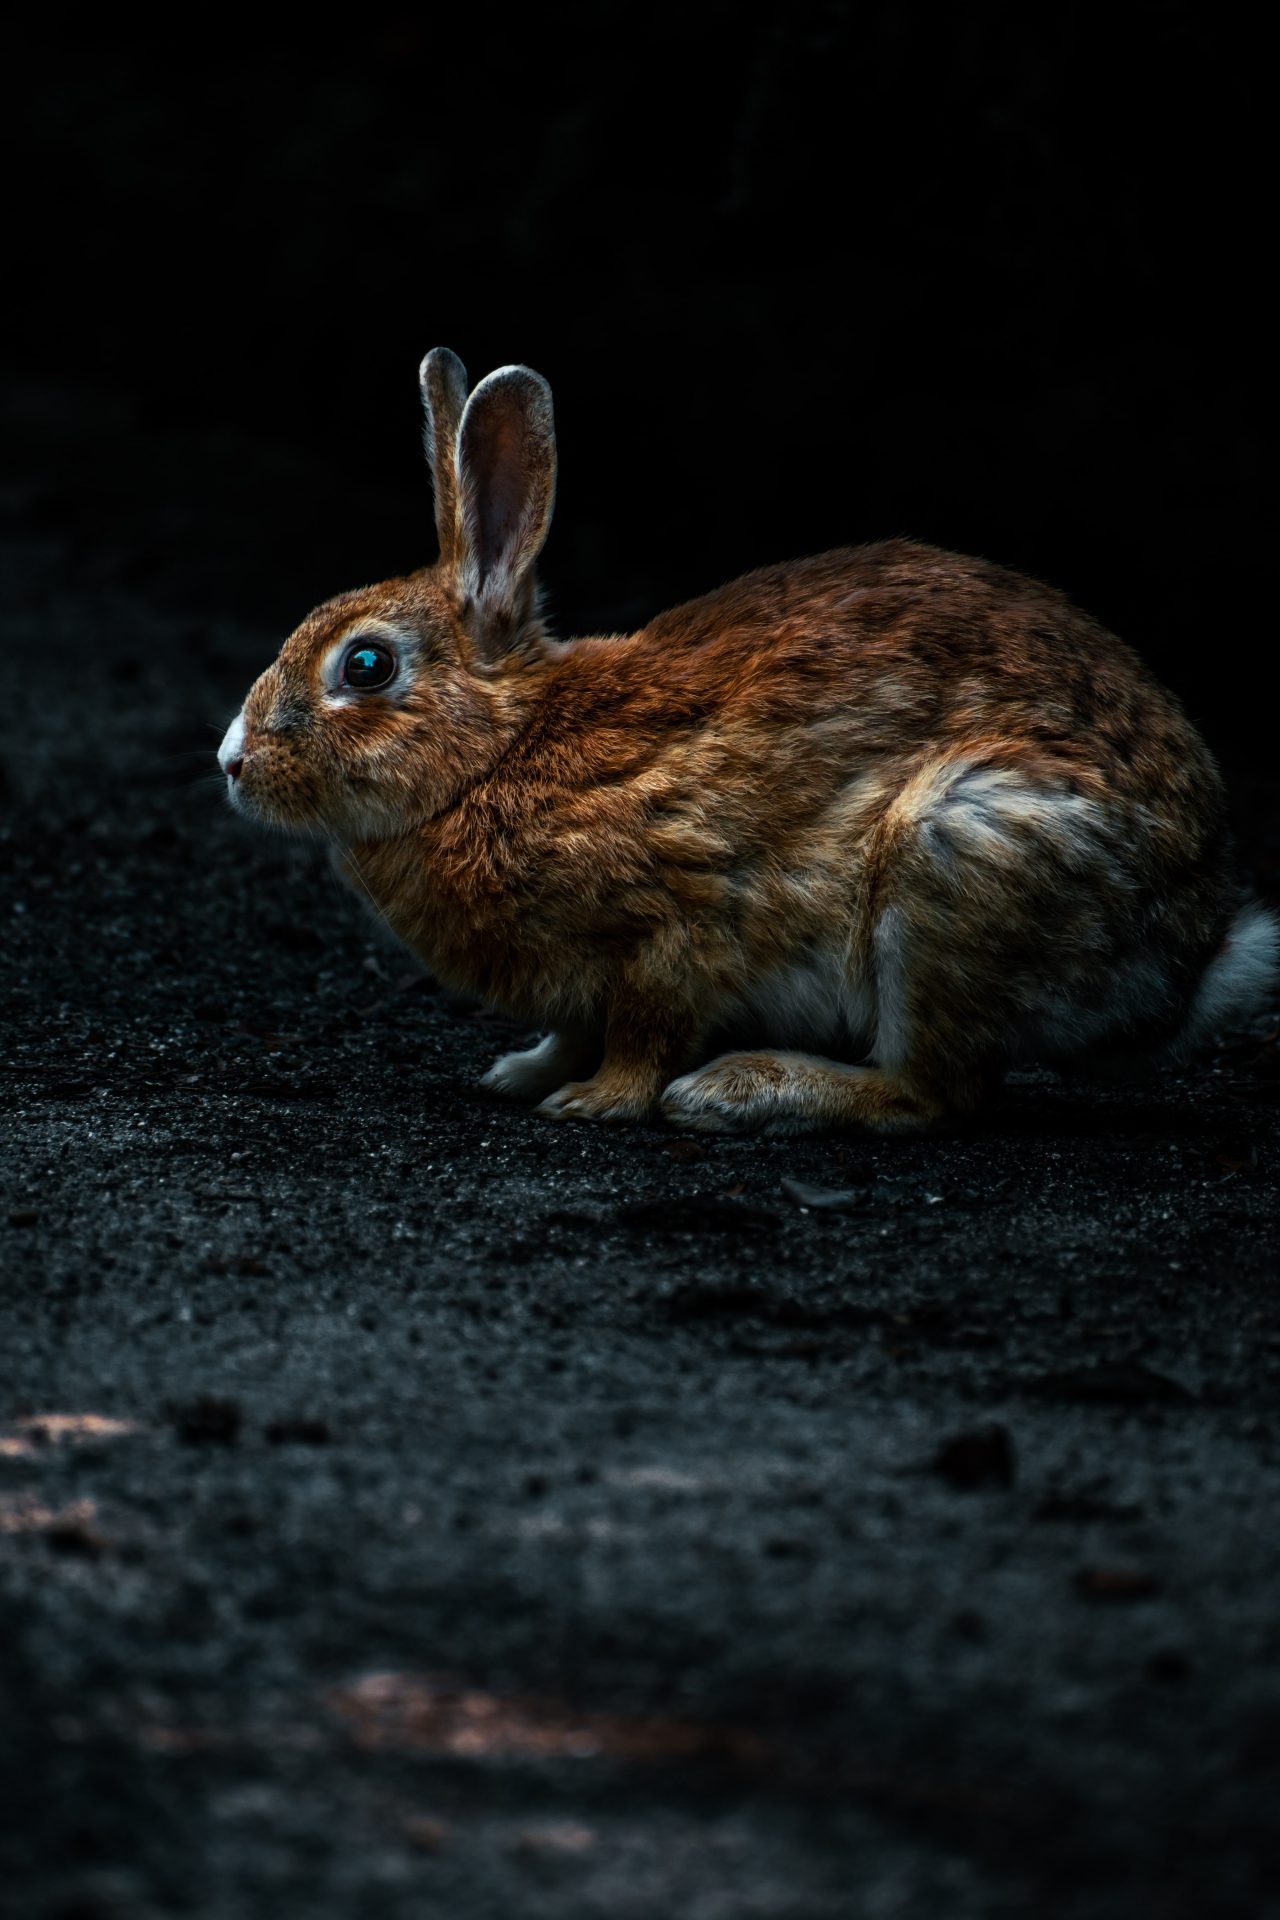 You are currently viewing Ōkunoshima (rabbit island) photography